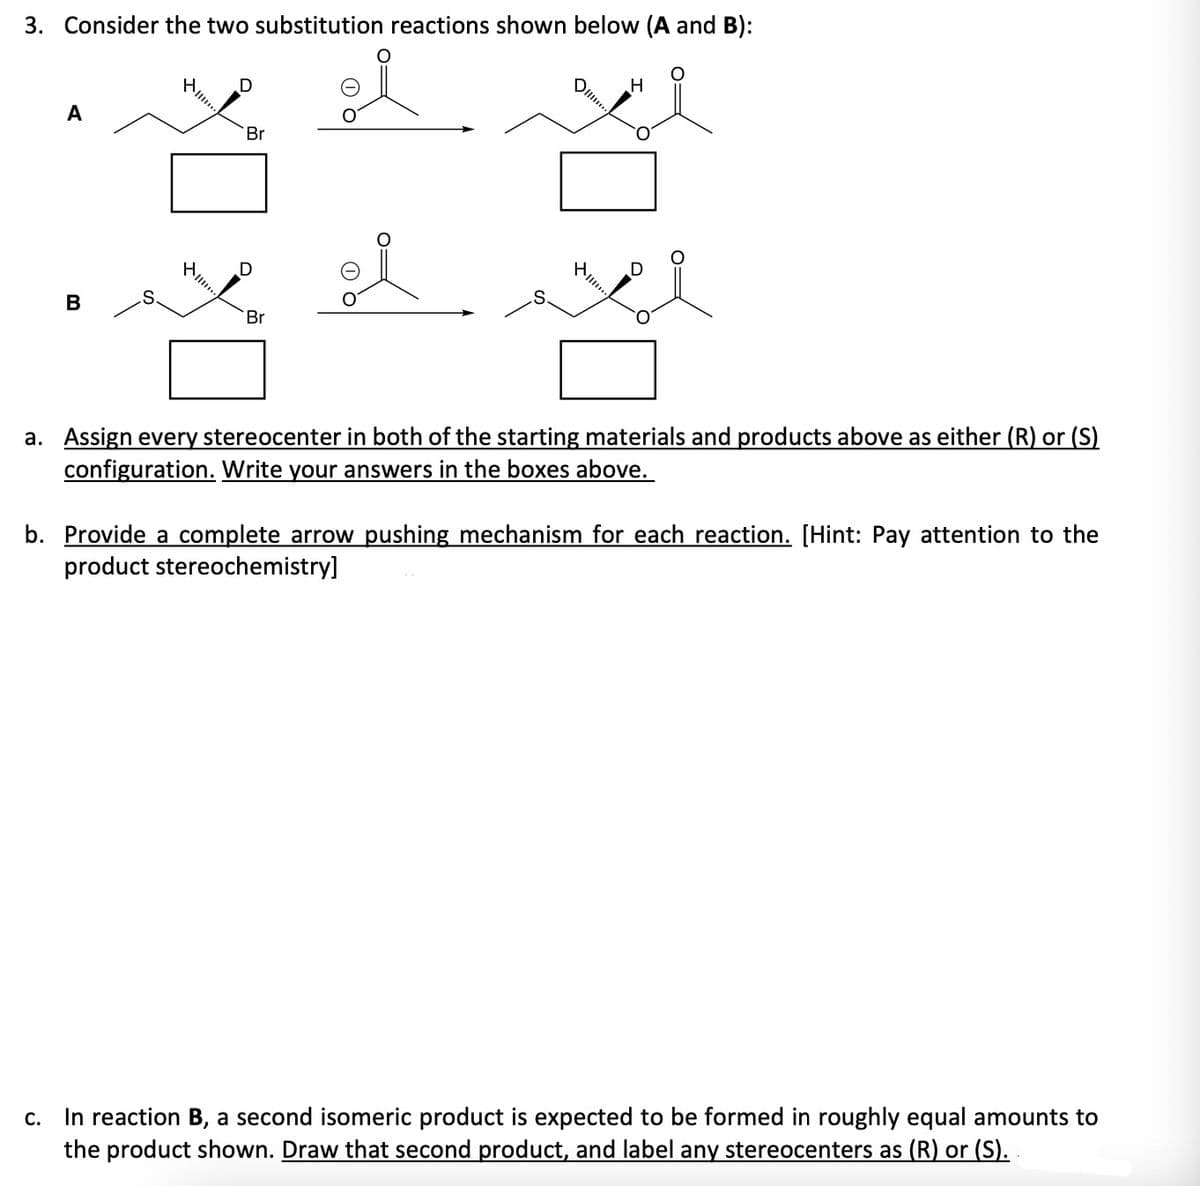 3. Consider the two substitution reactions shown below (A and B):
A
B
D
Br
ř
Br
O
DI....
...
H
a. Assign every stereocenter in both of the starting materials and products above as either (R) or (S)
configuration. Write your answers in the boxes above.
b. Provide a complete arrow pushing mechanism for each reaction. [Hint: Pay attention to the
product stereochemistry]
C.
In reaction B, a second isomeric product is expected to be formed in roughly equal amounts to
the product shown. Draw that second product, and label any stereocenters as (R) or (S)..